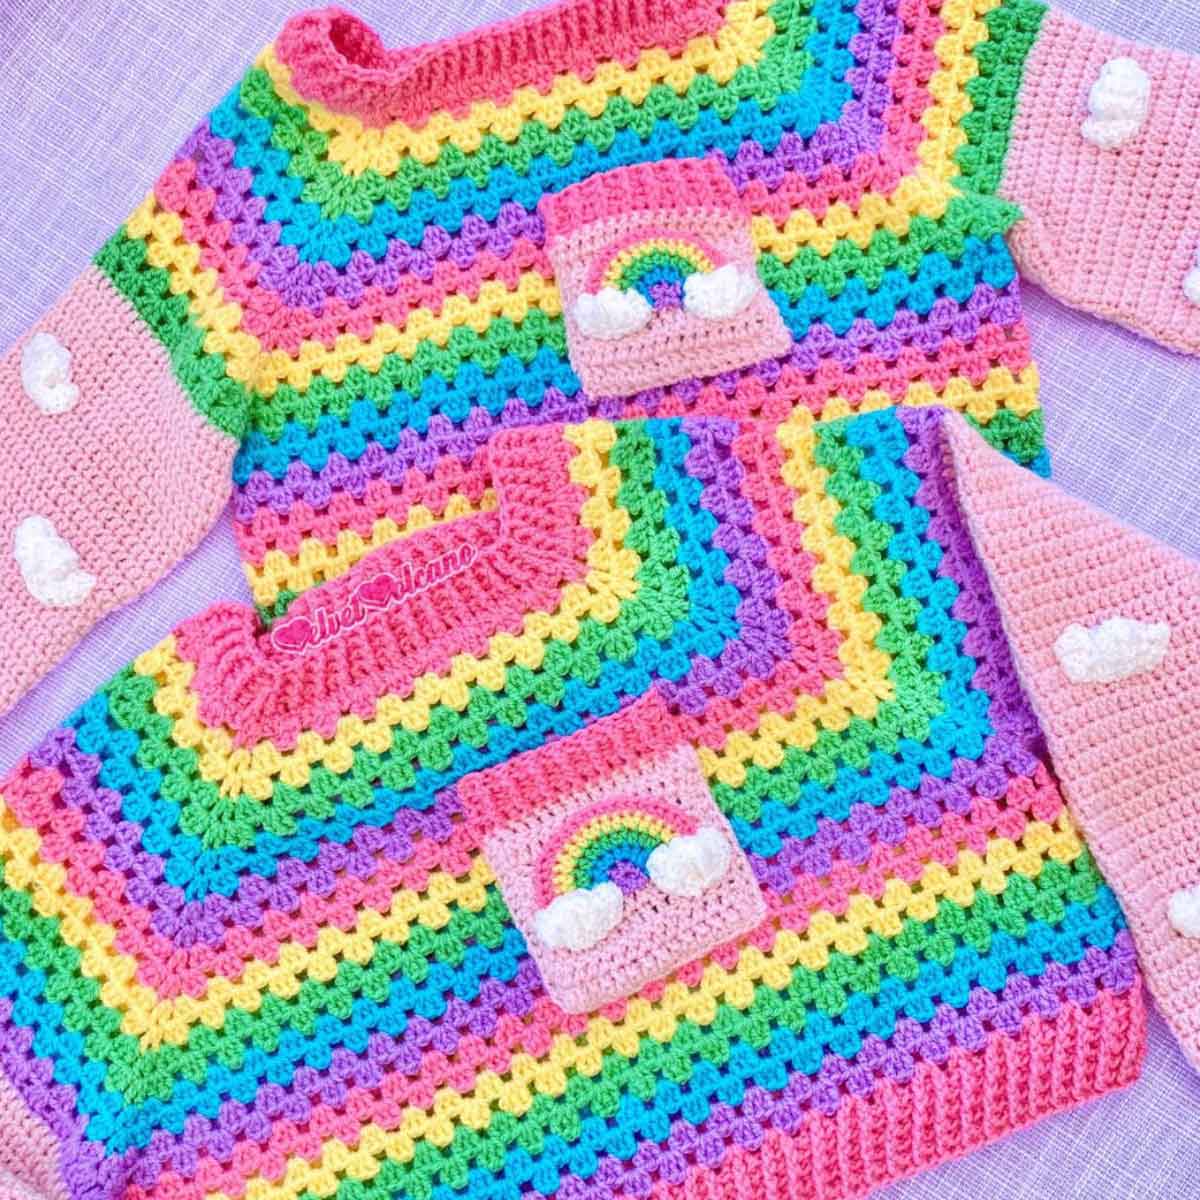 Rainbow sweater for glow party inspiration